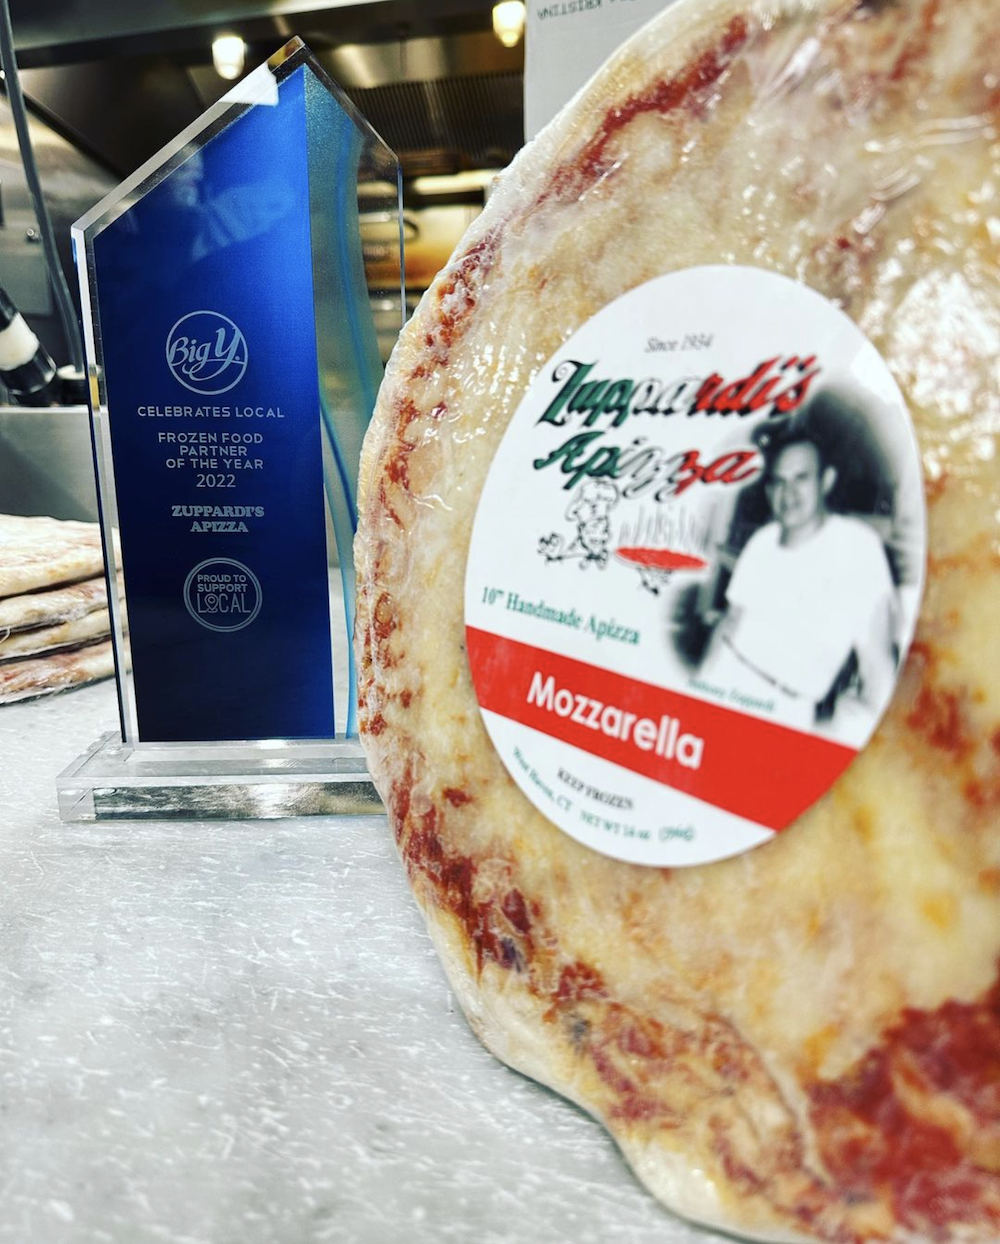 A frozen pizza made by Zuppardi's Apizza in West Haven, CT, sits next to a trophy commemorating an award won by Zuppardi's.